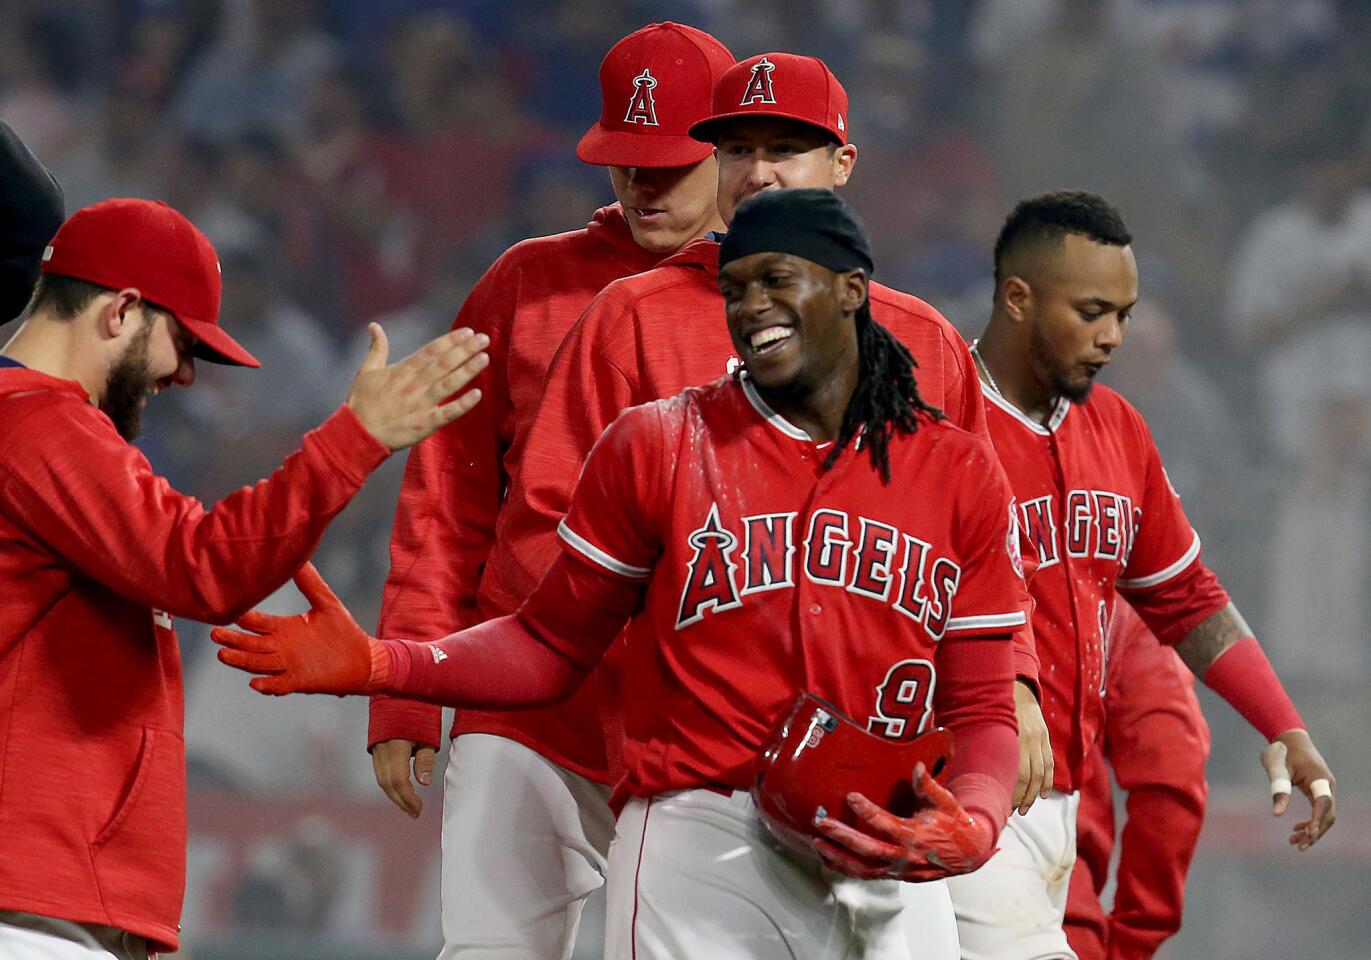 Teammates congratulate Angels center fielder Cameron Maybin after his walk-off strikeout gave the Angels a 3-2 victory over the Dodgerson June 28.